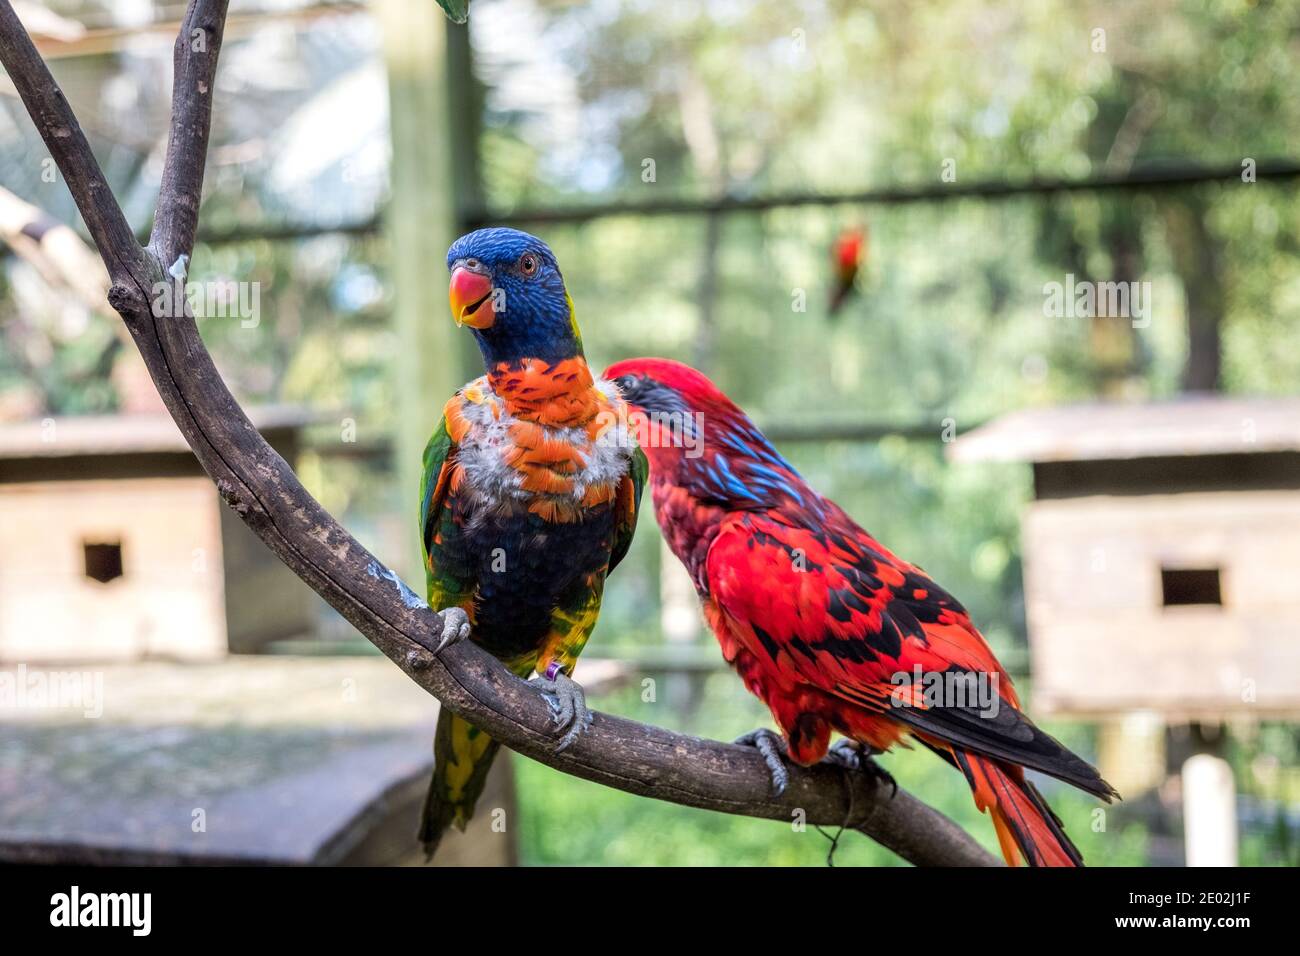 MALAYSIA, KUALA LUMPUR, JANUARY 07, 2018: Two parrots are sitting on a branch in the aviary. Rainbow and Red Loris in Kuala Lumpur Bird Park. Stock Photo